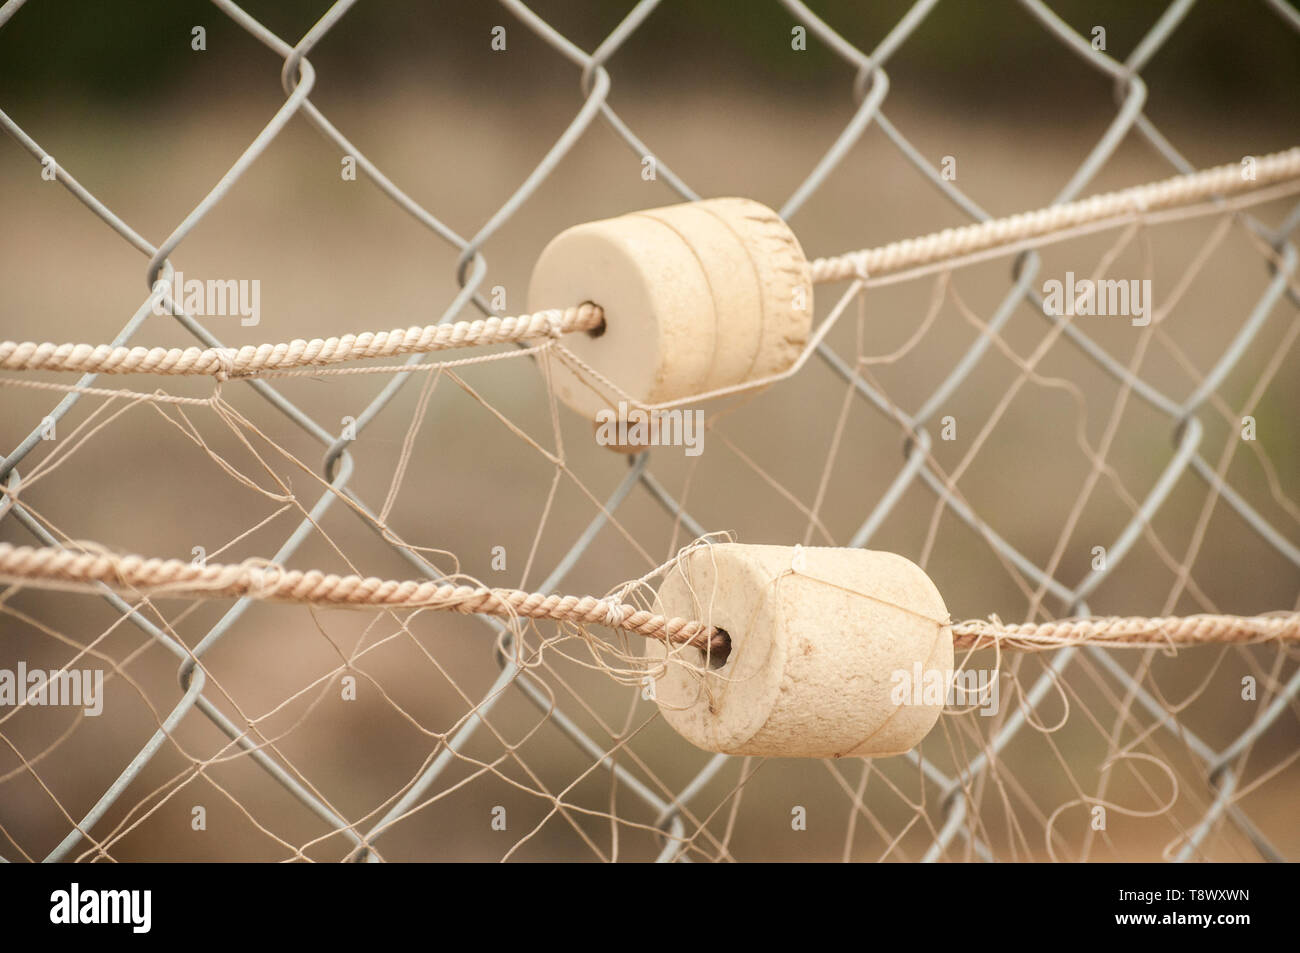 Fishing net with cork floats on wire mesh closeup as decorative